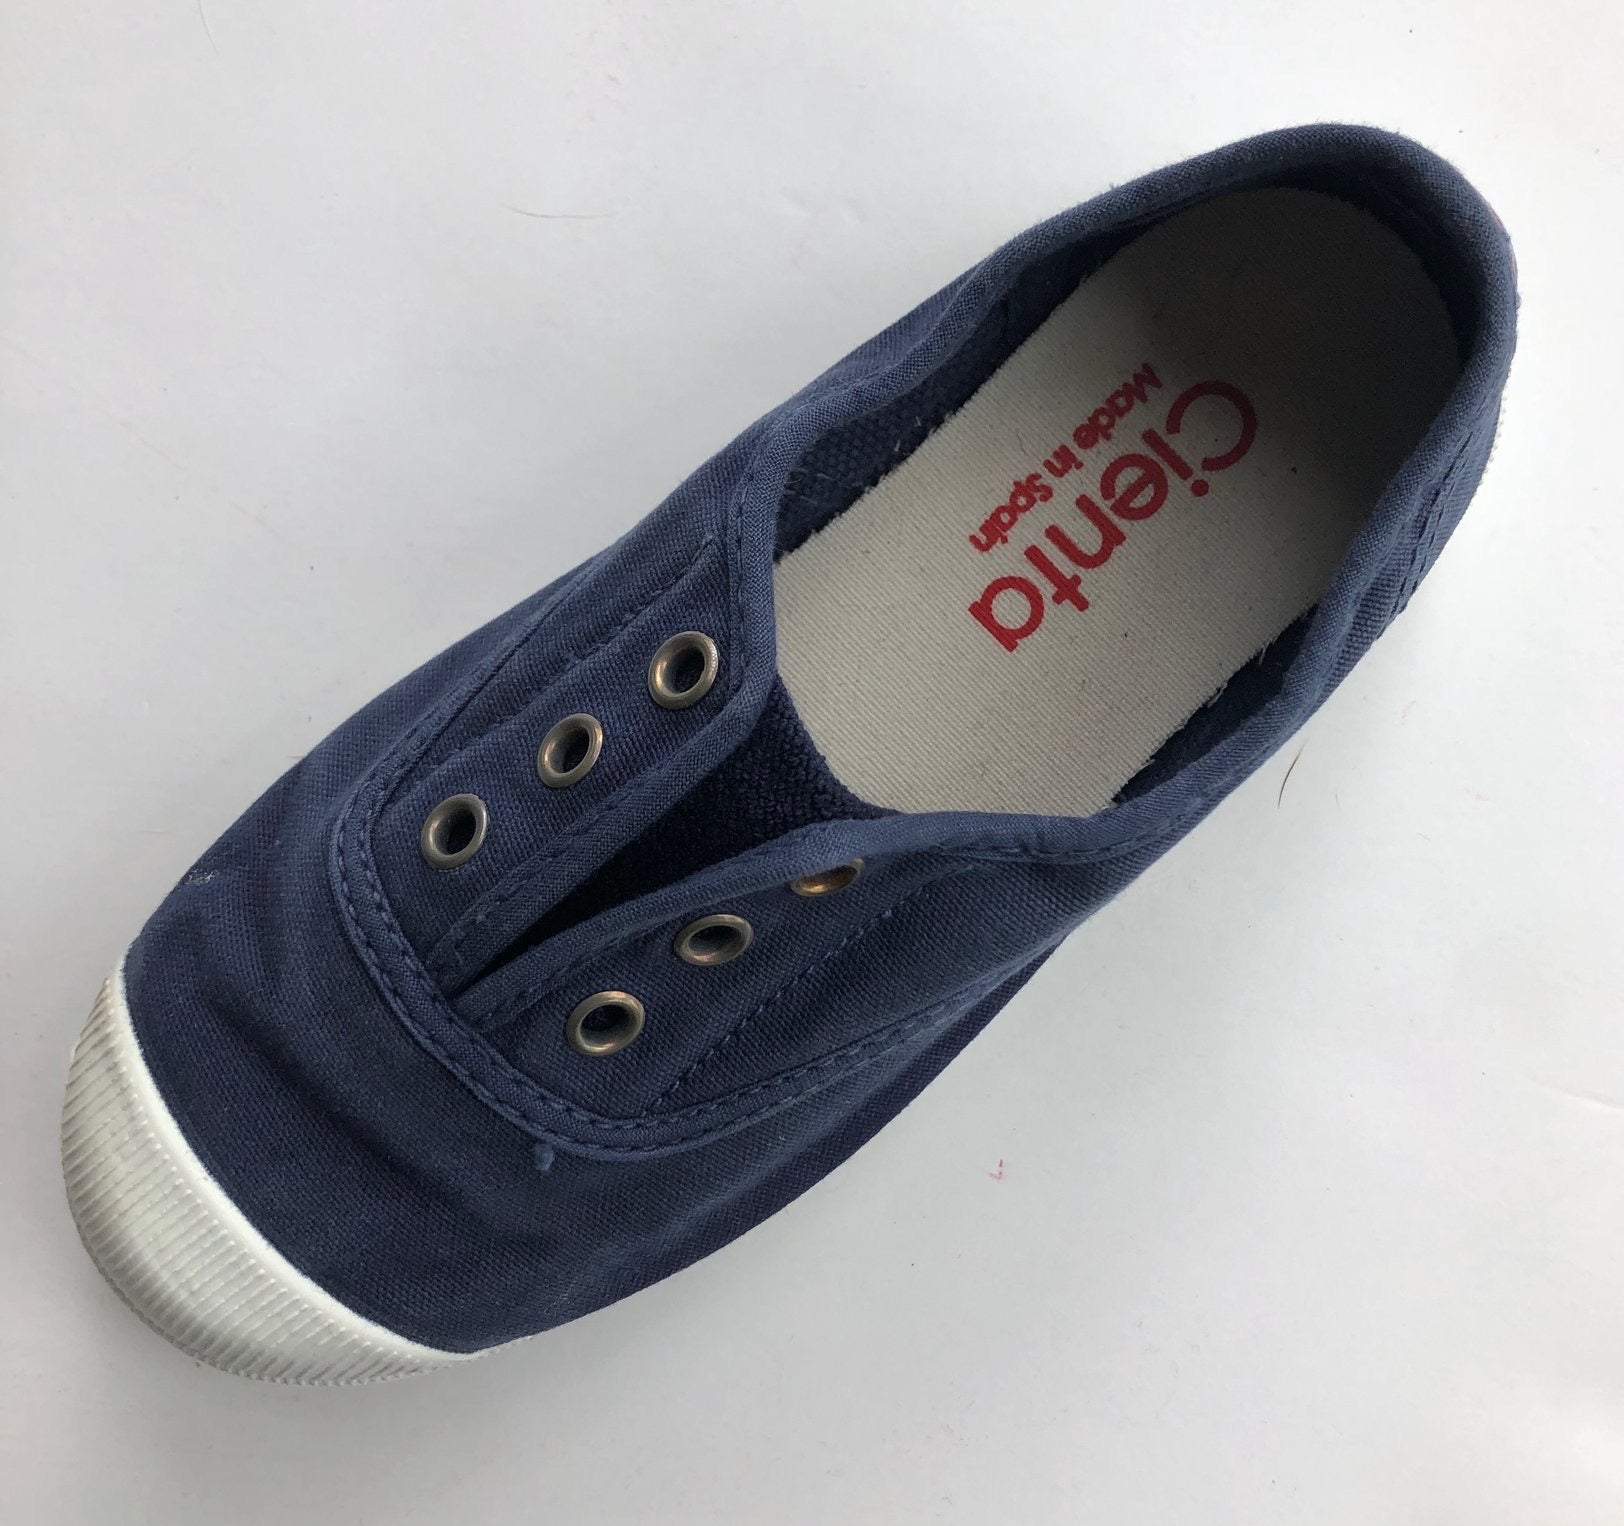 Cienta Distressed Laceless Canvas Sneaker, 70777 - Azul Oscuro / Washed Navy Blue